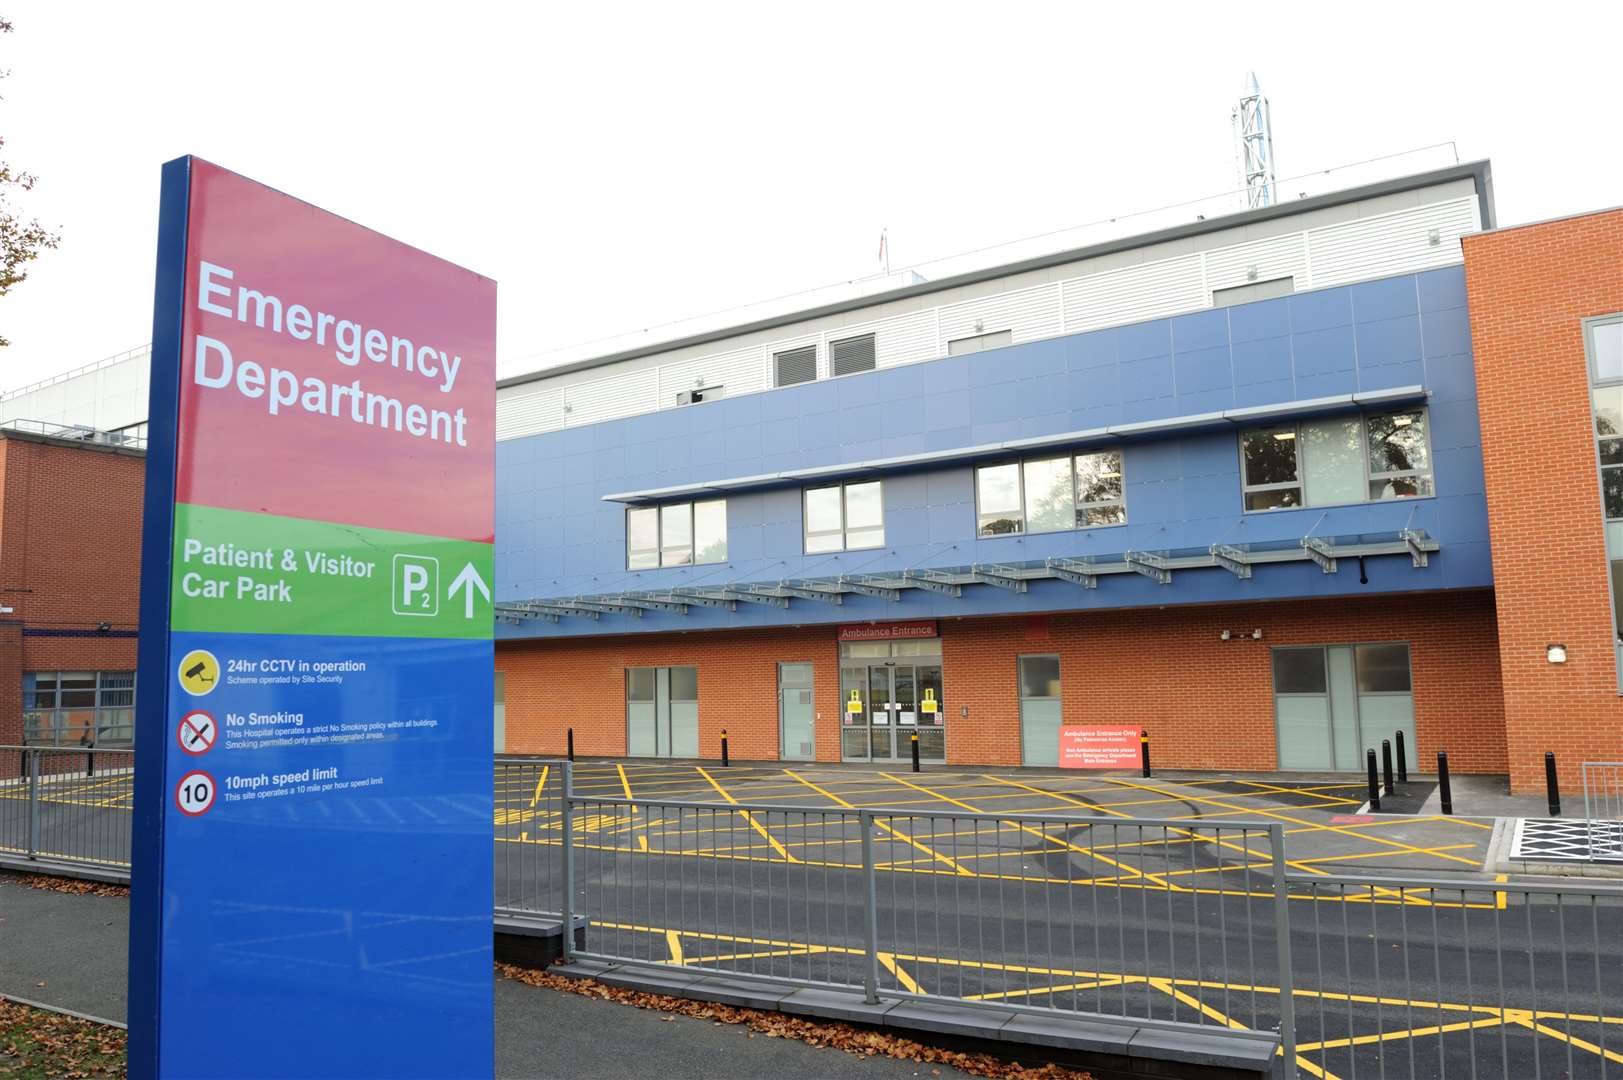 Medway Maritime Hospital emergency department was visited during an unannounced inspection by the CQC before Christmas